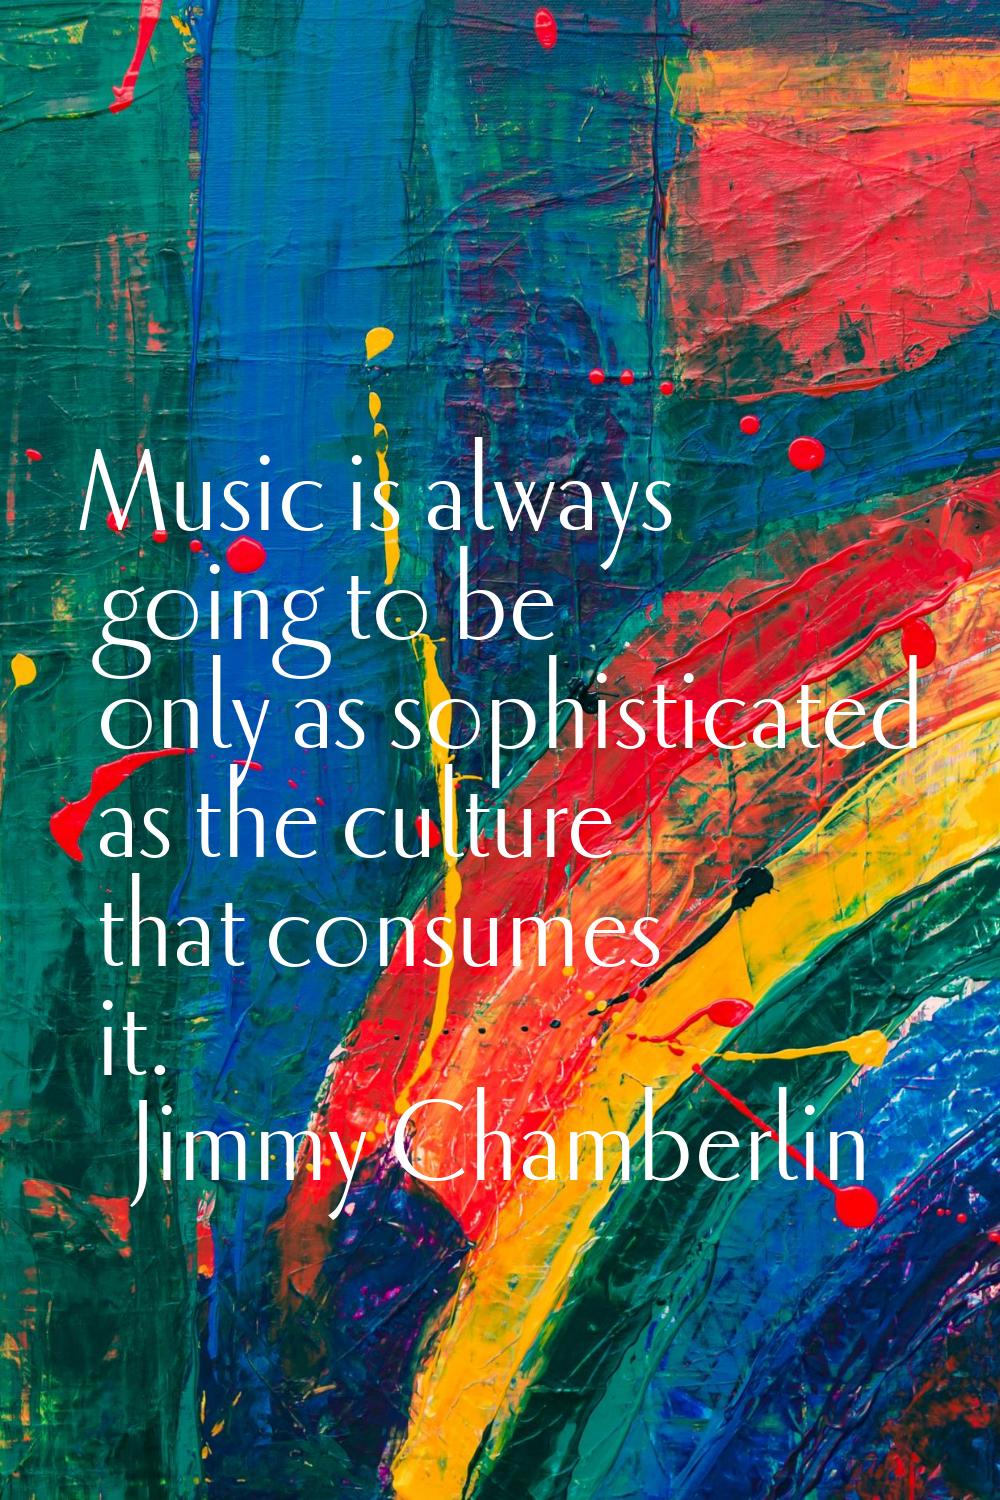 Music is always going to be only as sophisticated as the culture that consumes it.